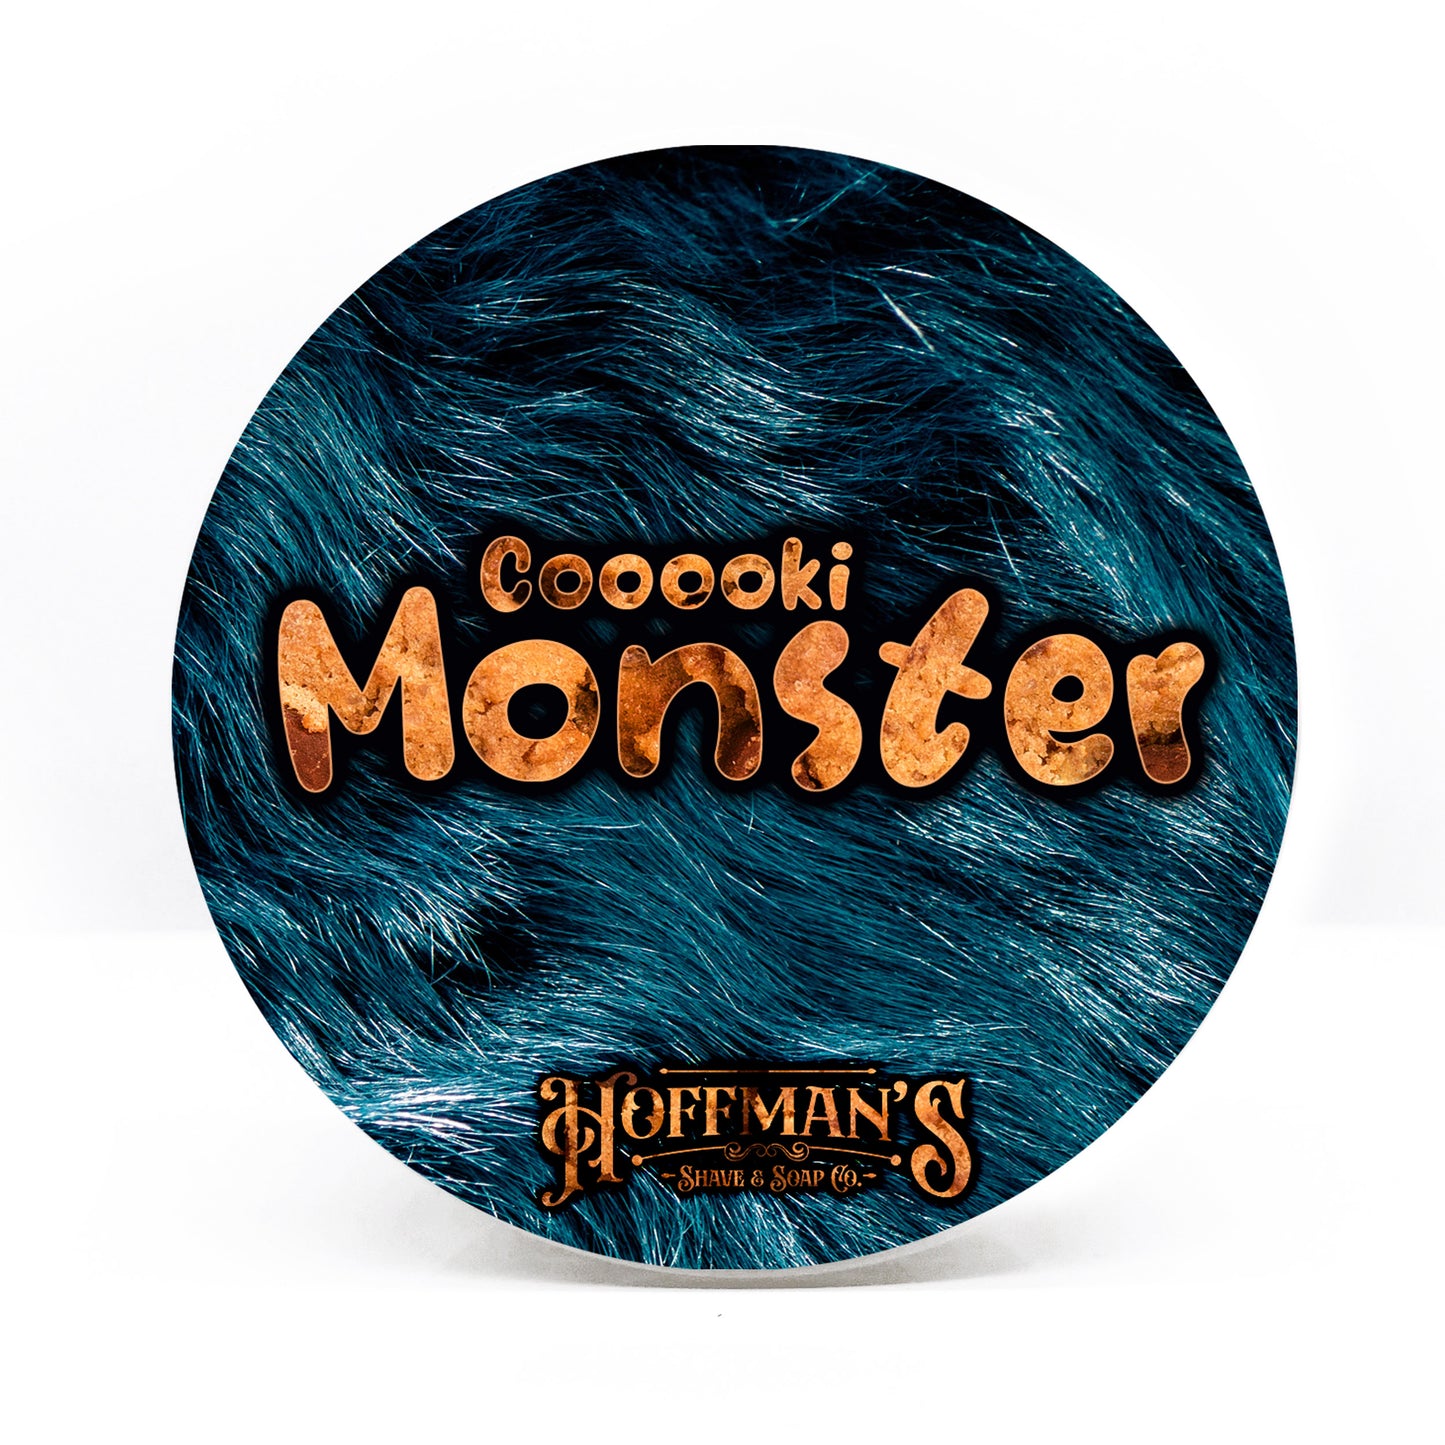 Cooookie Monster Shave Soap 4oz